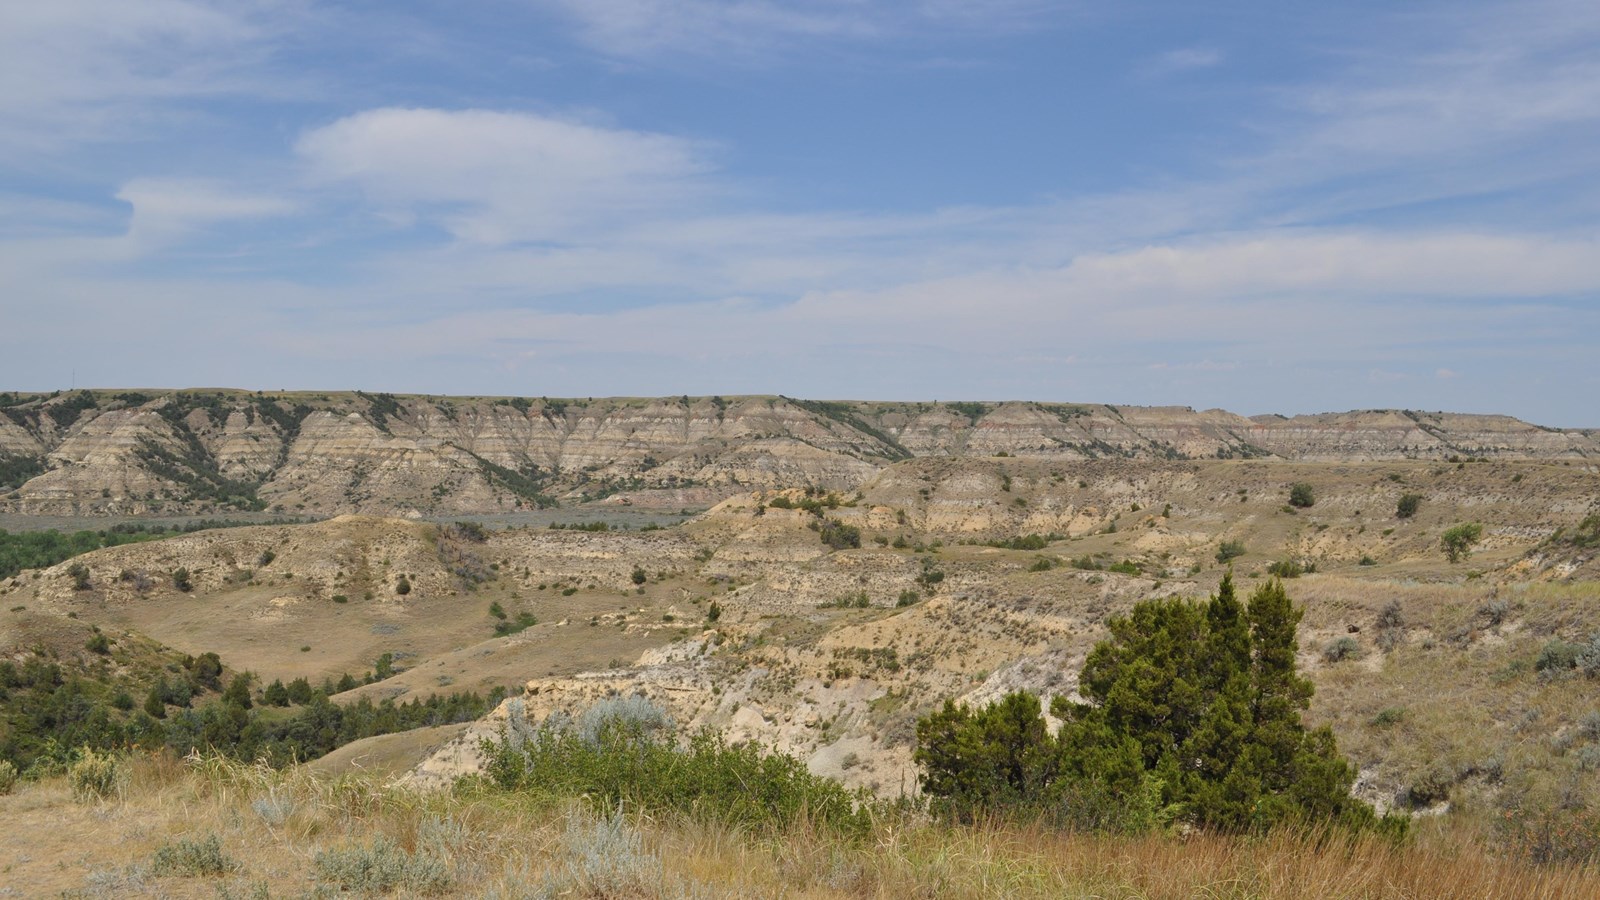 A view across a valley in Theodore Roosevelt National Park, under a blue sky.